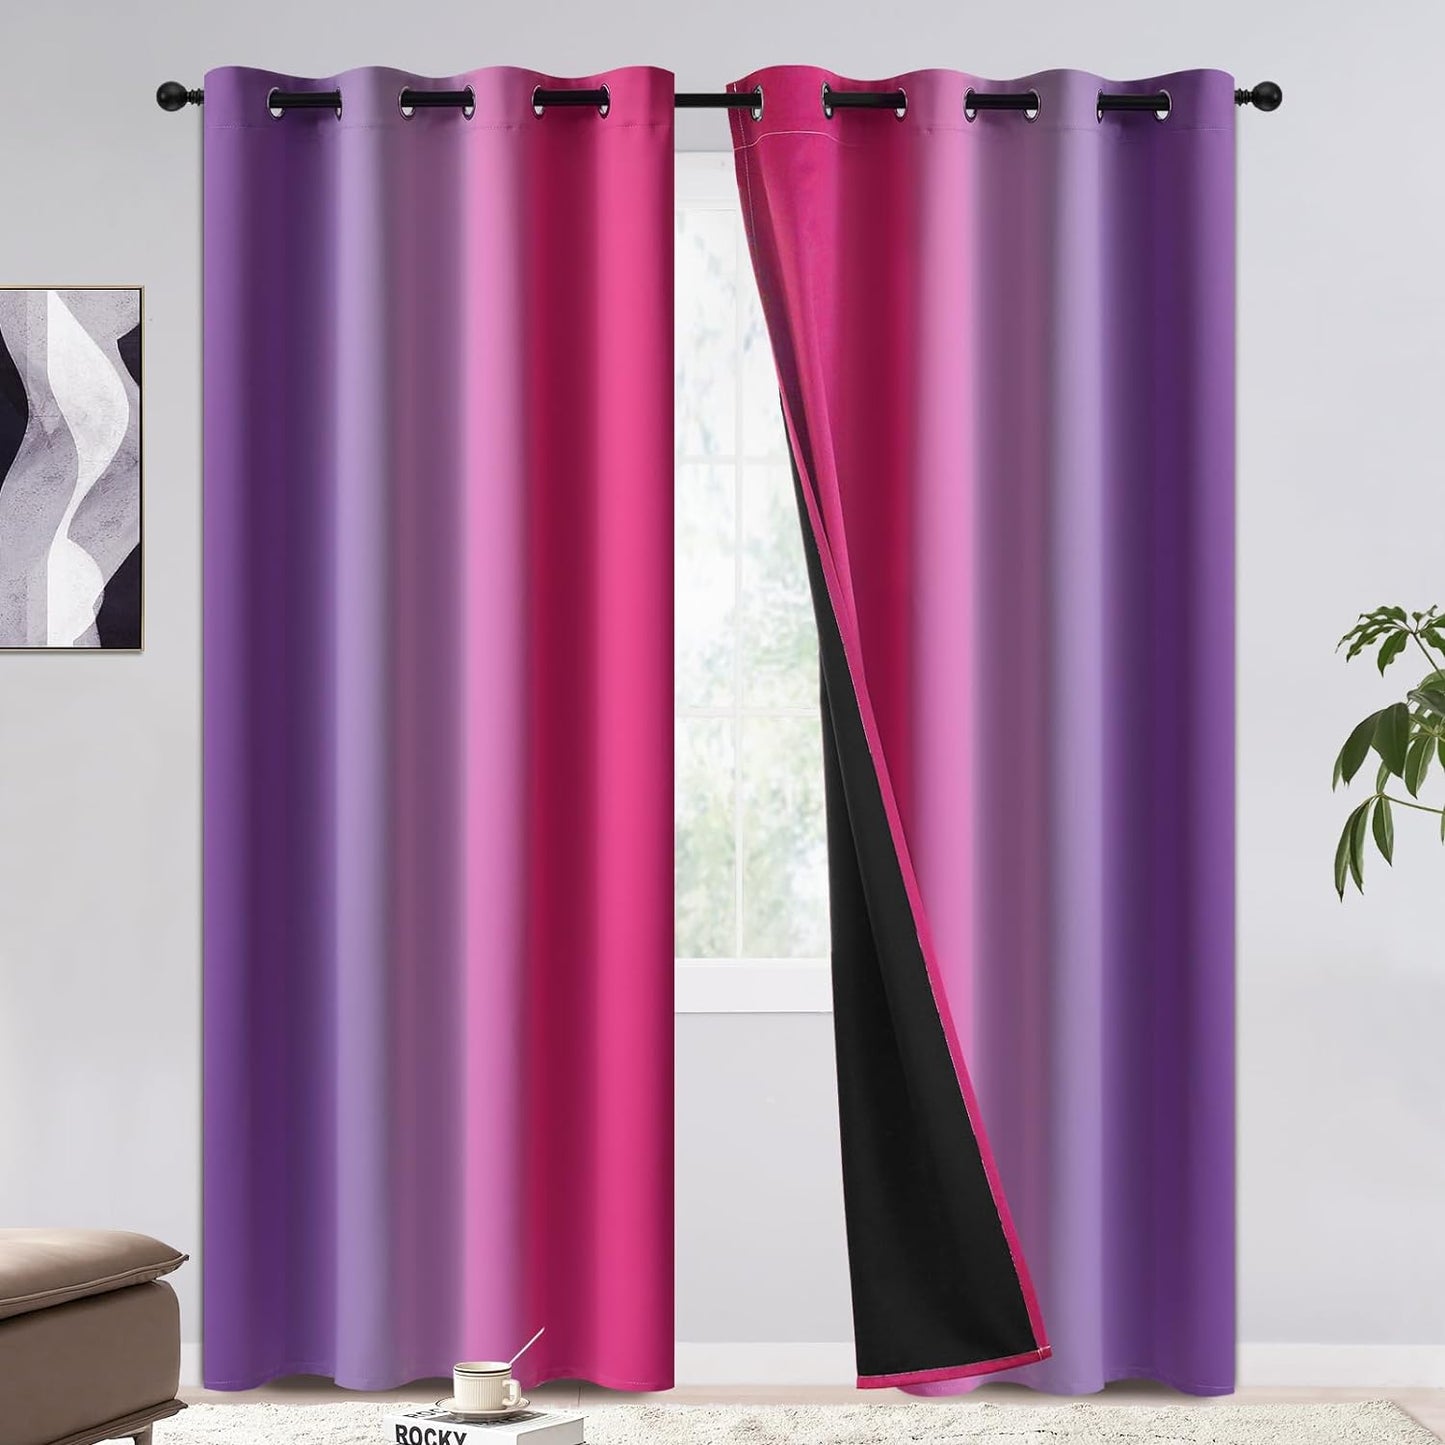 COSVIYA 100% Blackout Curtains & Drapes Ombre Purple Curtains 63 Inch Length 2 Panels,Full Room Darkening Grommet Gradient Insulated Thermal Window Curtains for Bedroom/Living Room,52X63 Inches  COSVIYA Blackout Pink And Purple 52W X 84L 